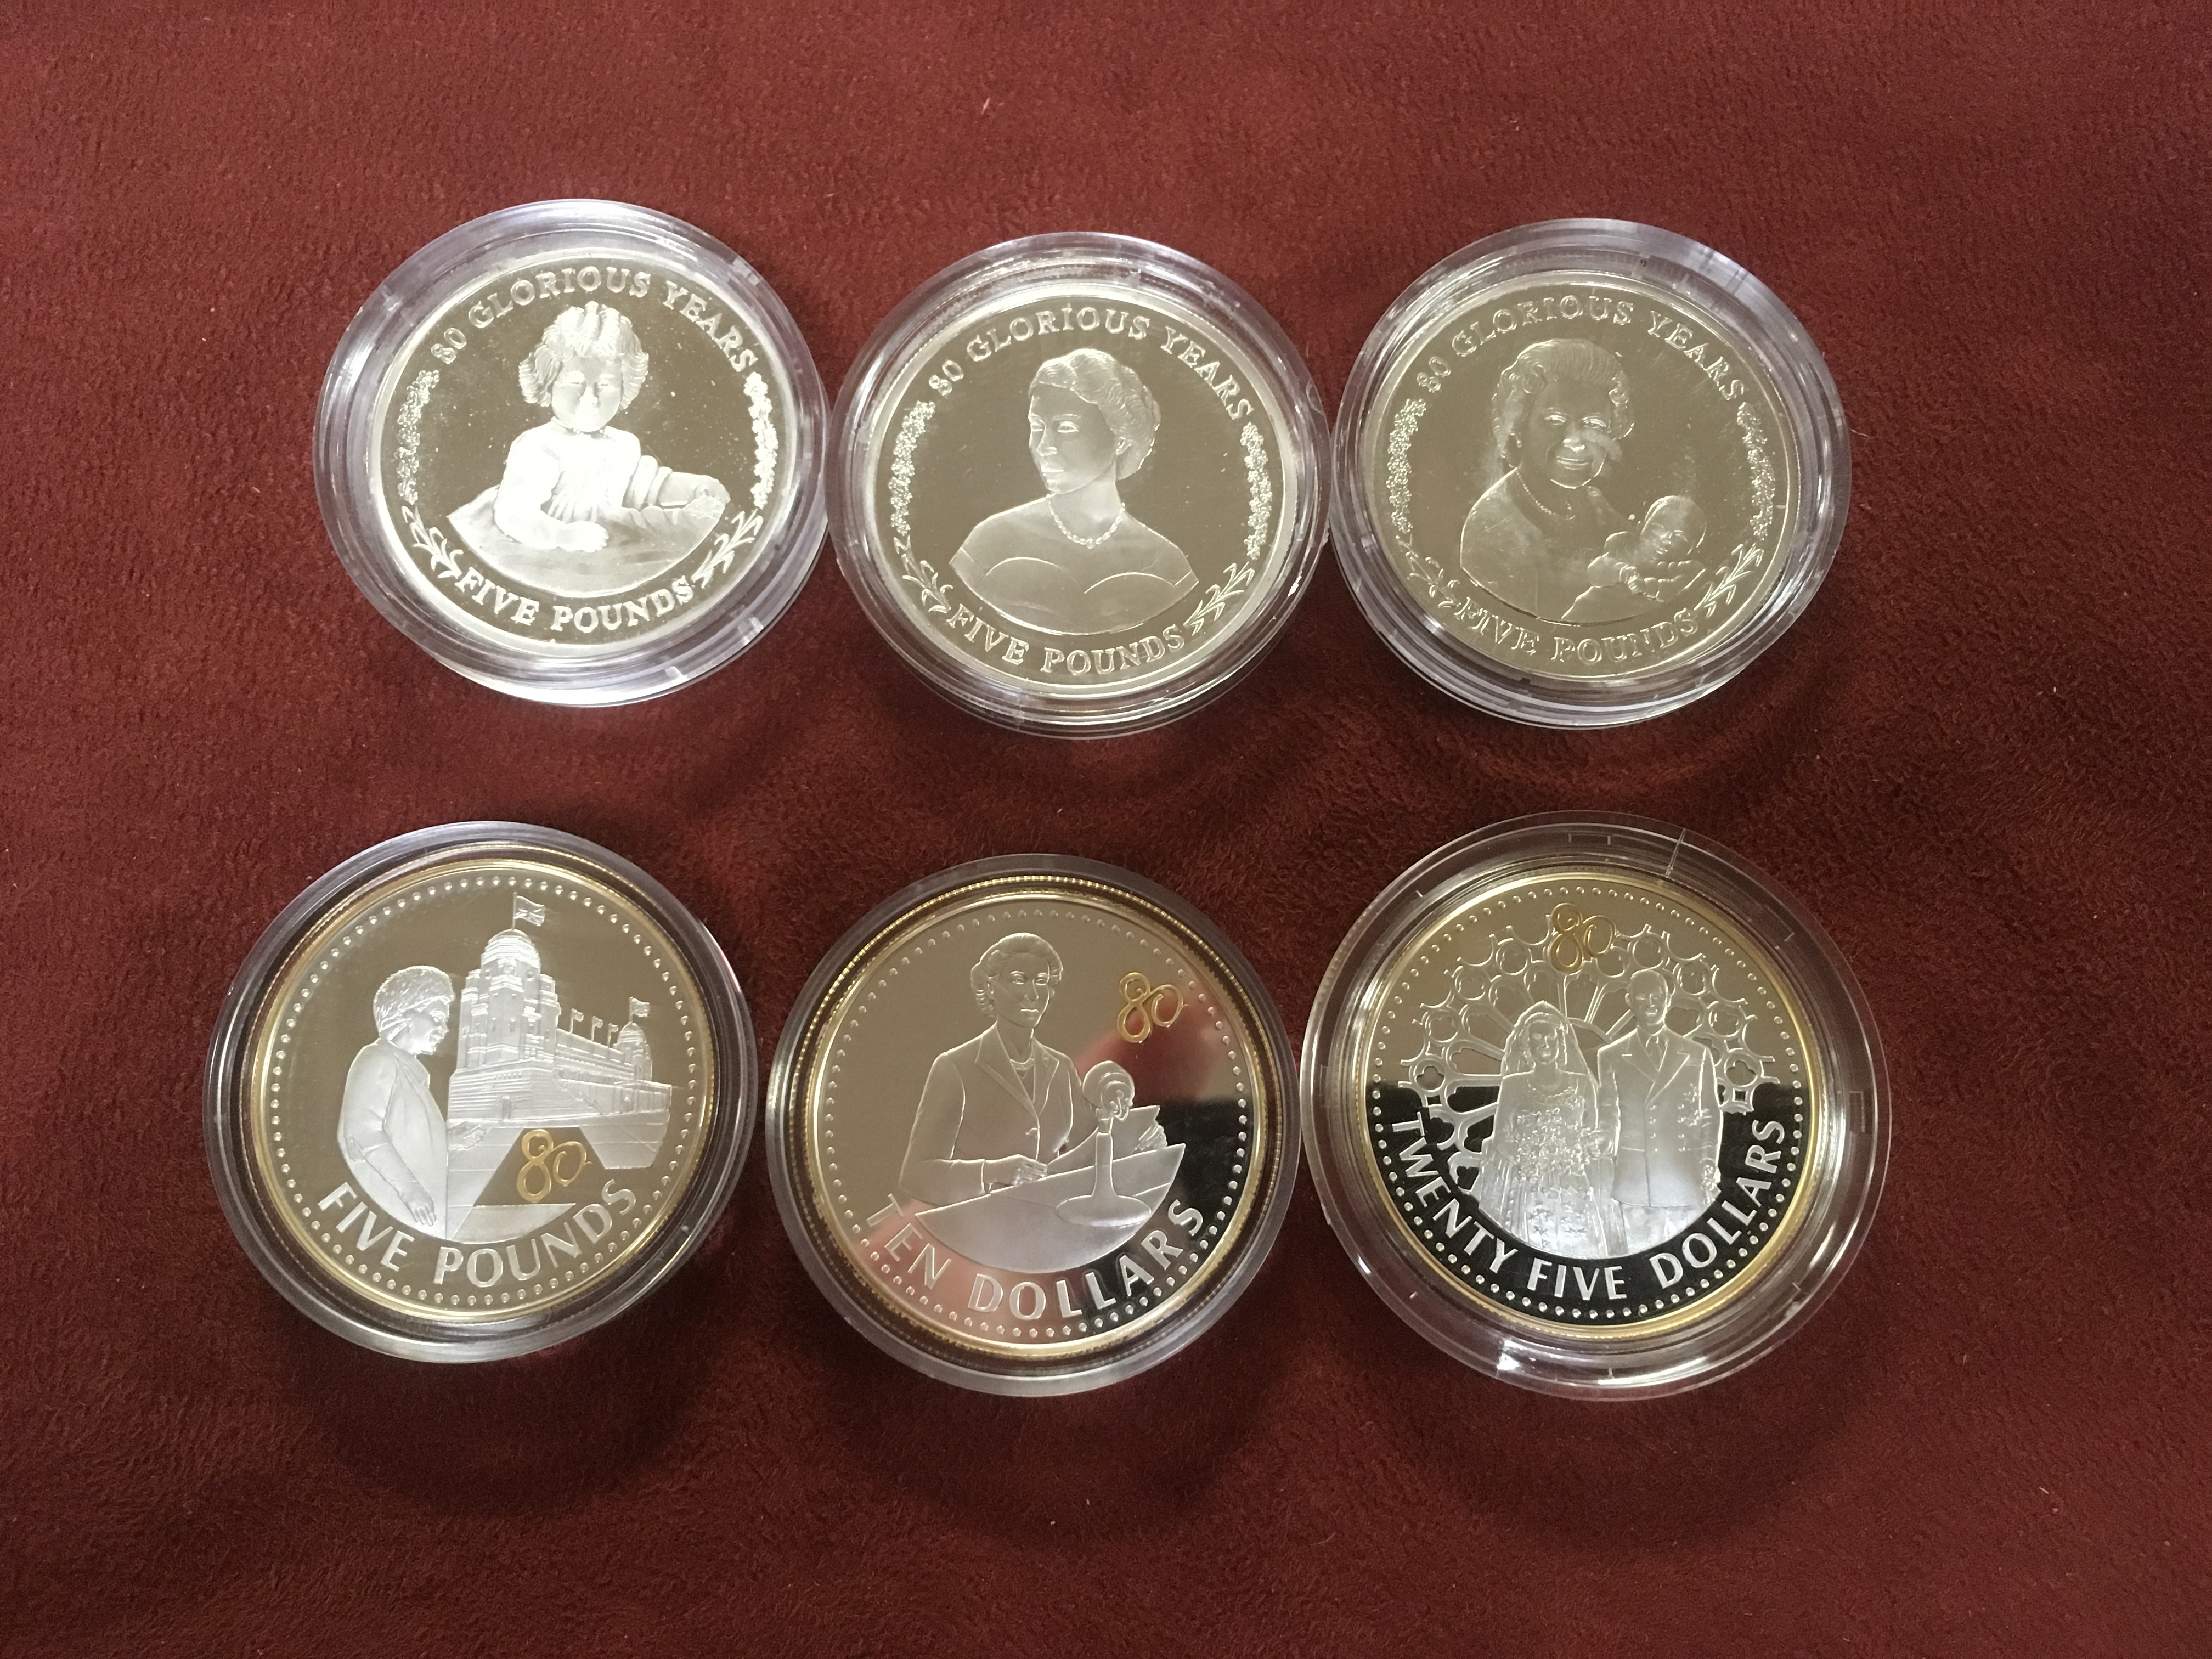 2006 ROYALTY SILVER PROOF COINS FROM JERSEY, GIBRALTAR, SOLOMONS ETC, ALL IN CAPSULES, - Image 2 of 3